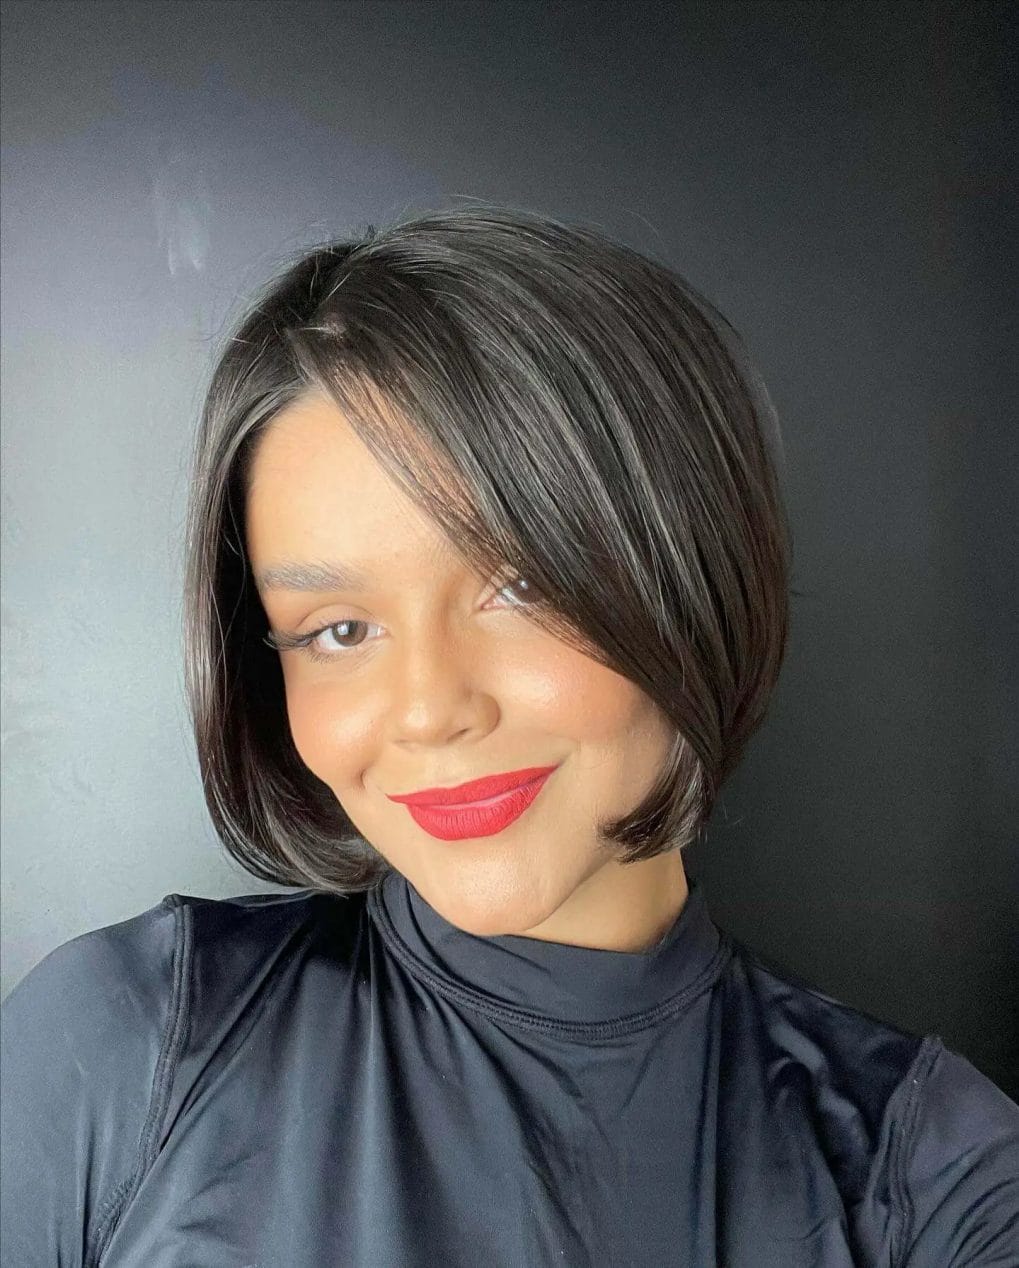 Shiny black '90s bob with inward curve and elegant side parting